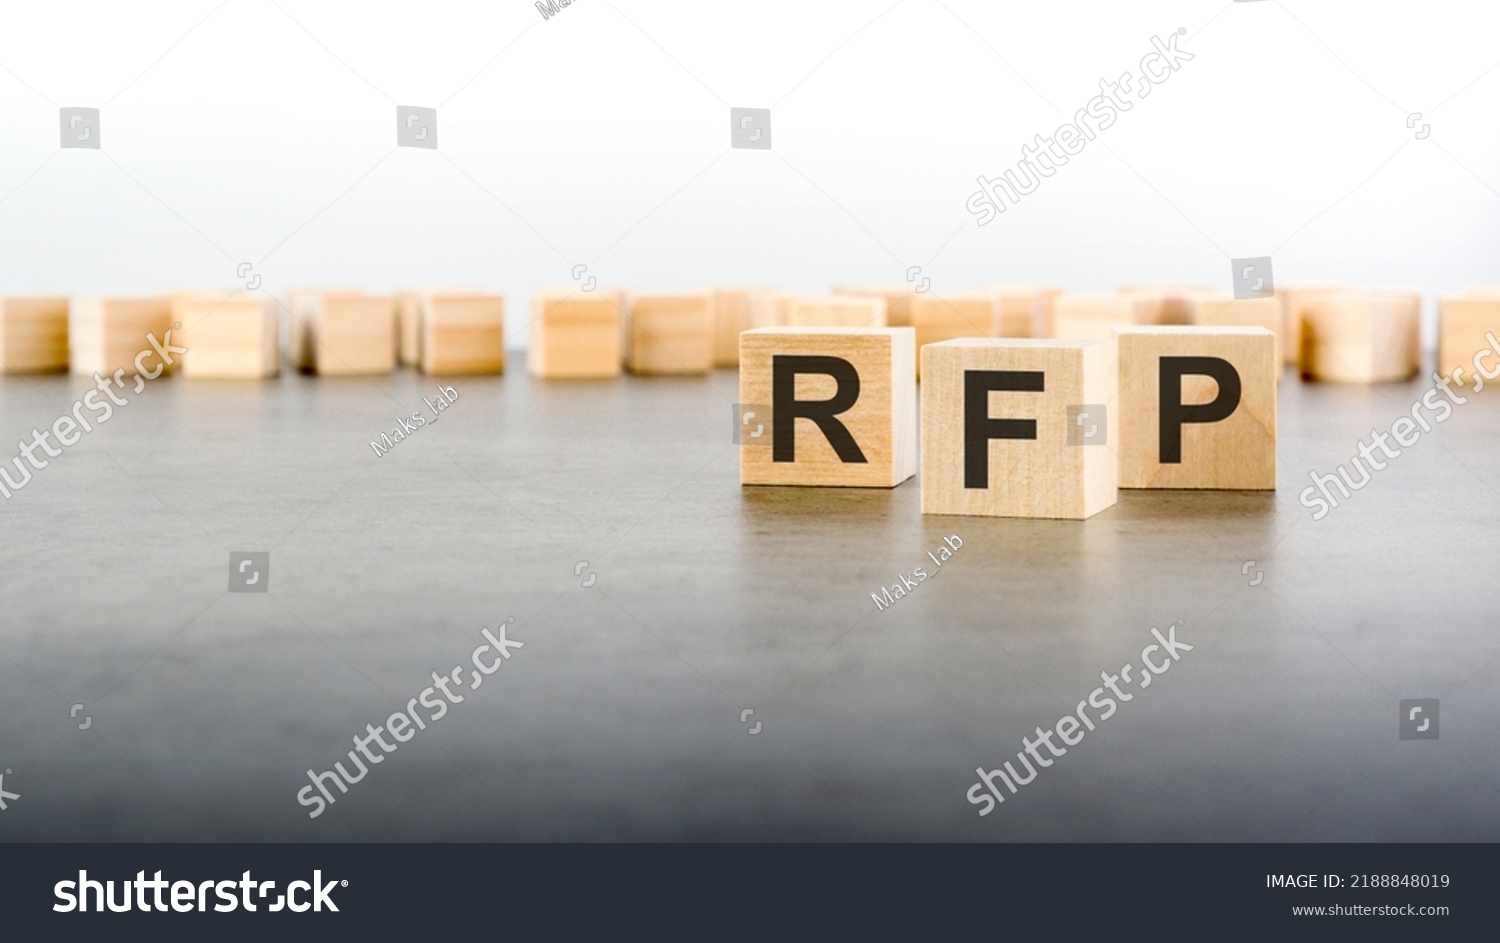 RFP - Request For Proposal - letter pices on the wooden cubes #2188848019